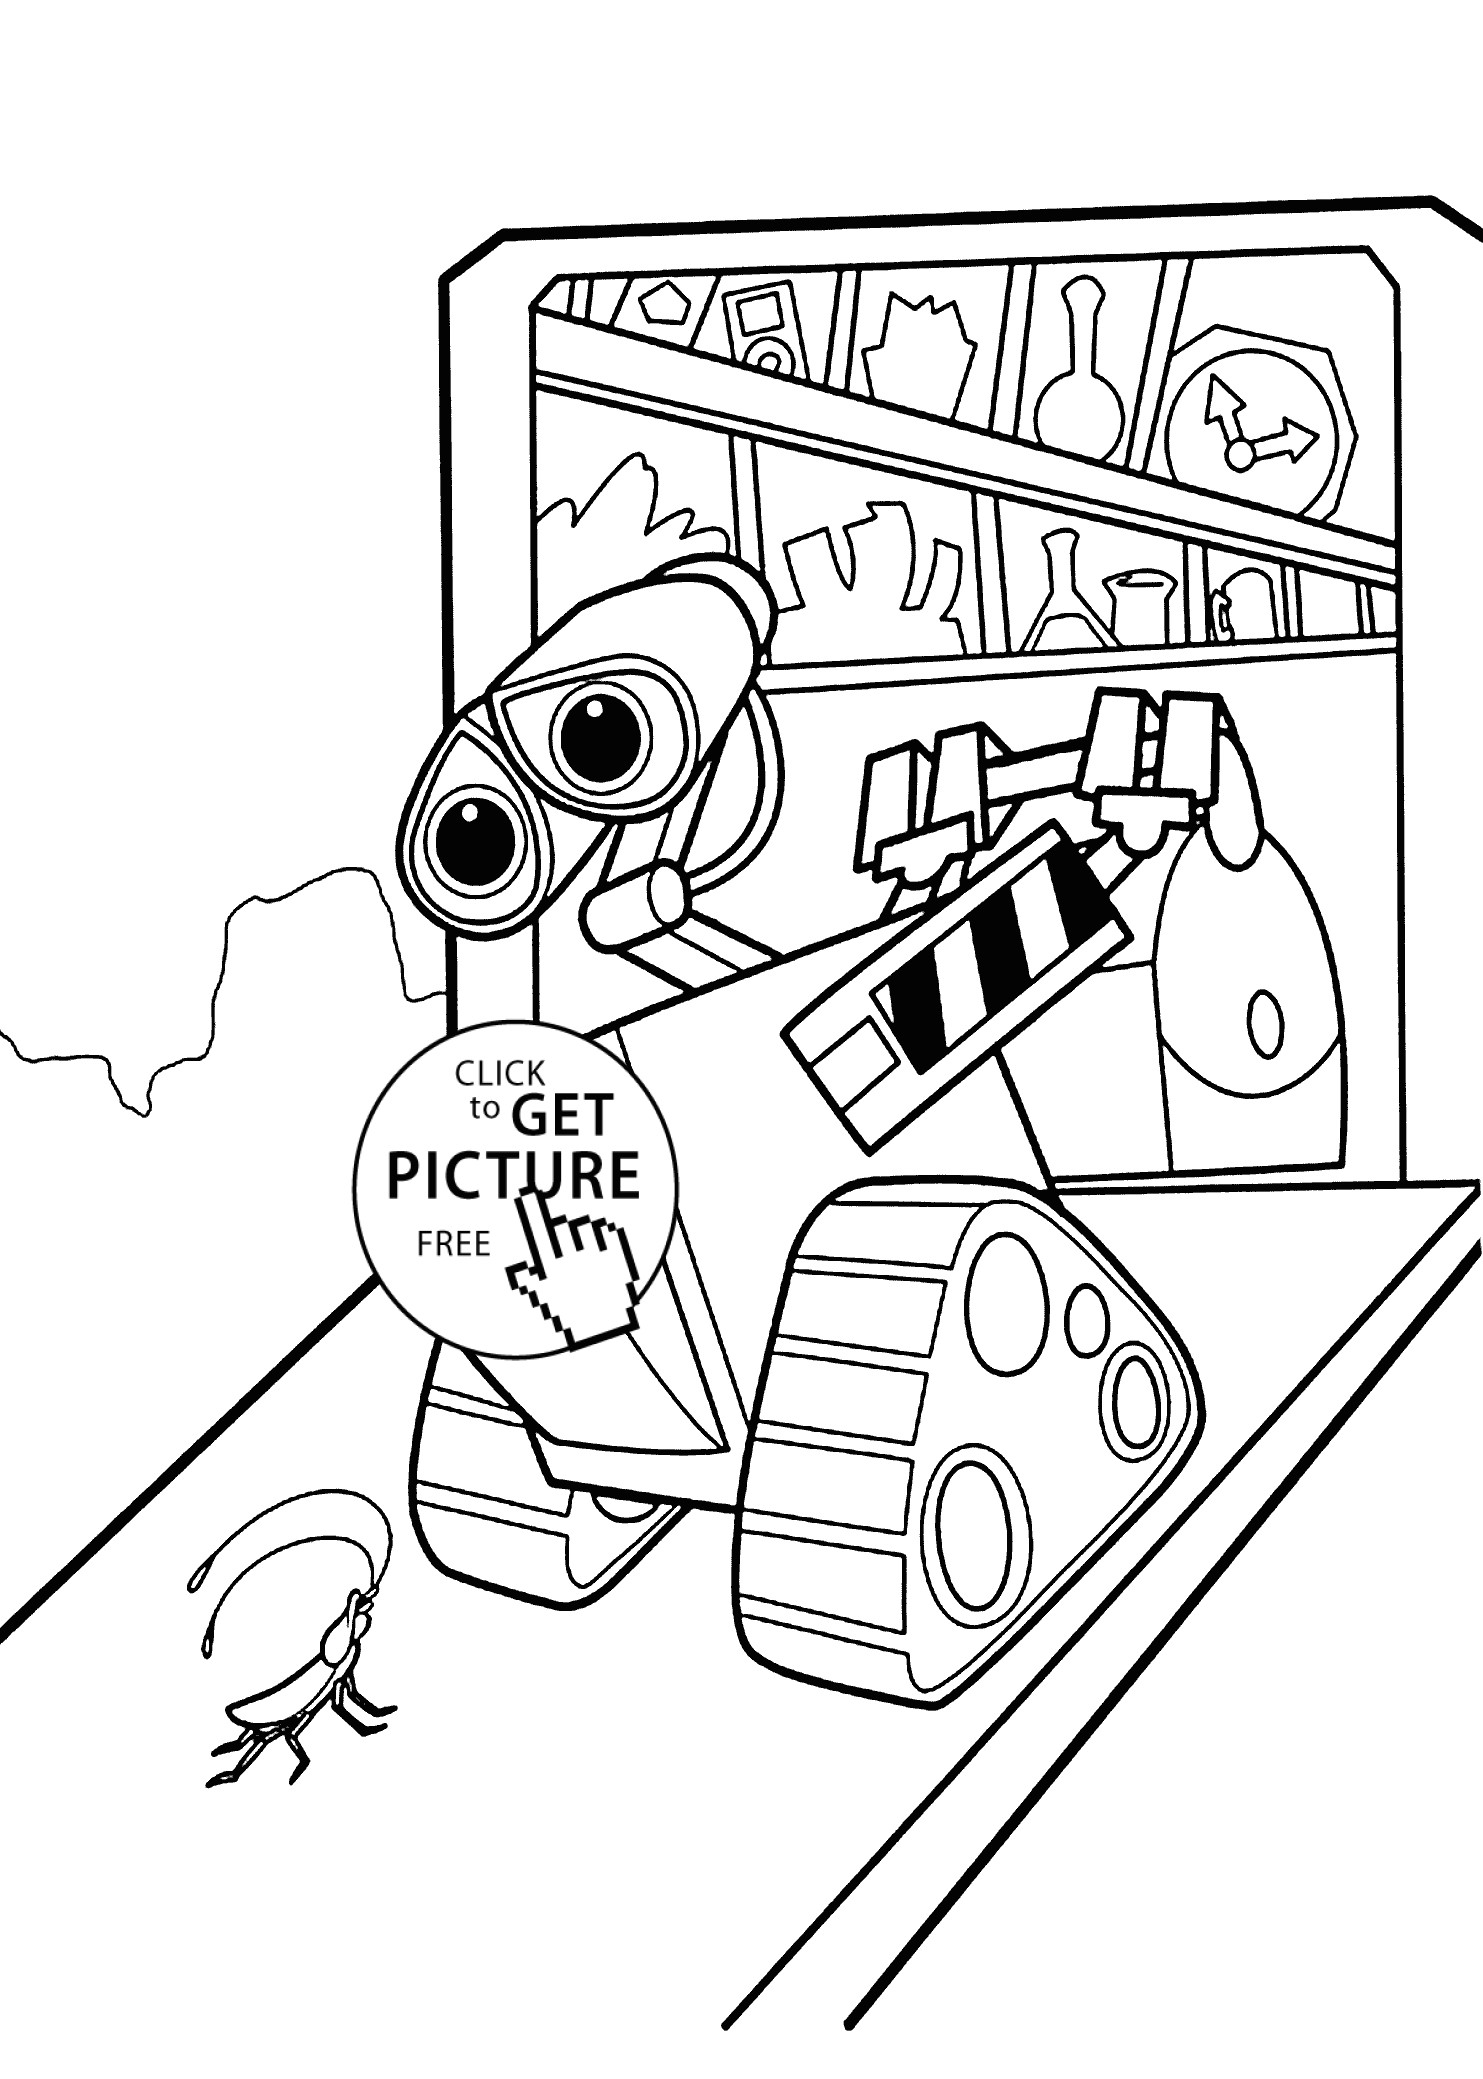 Wall E Cartoon Drawing Wall E Home Coloring Pages for Kids Printable Free Coloing 4kids Com